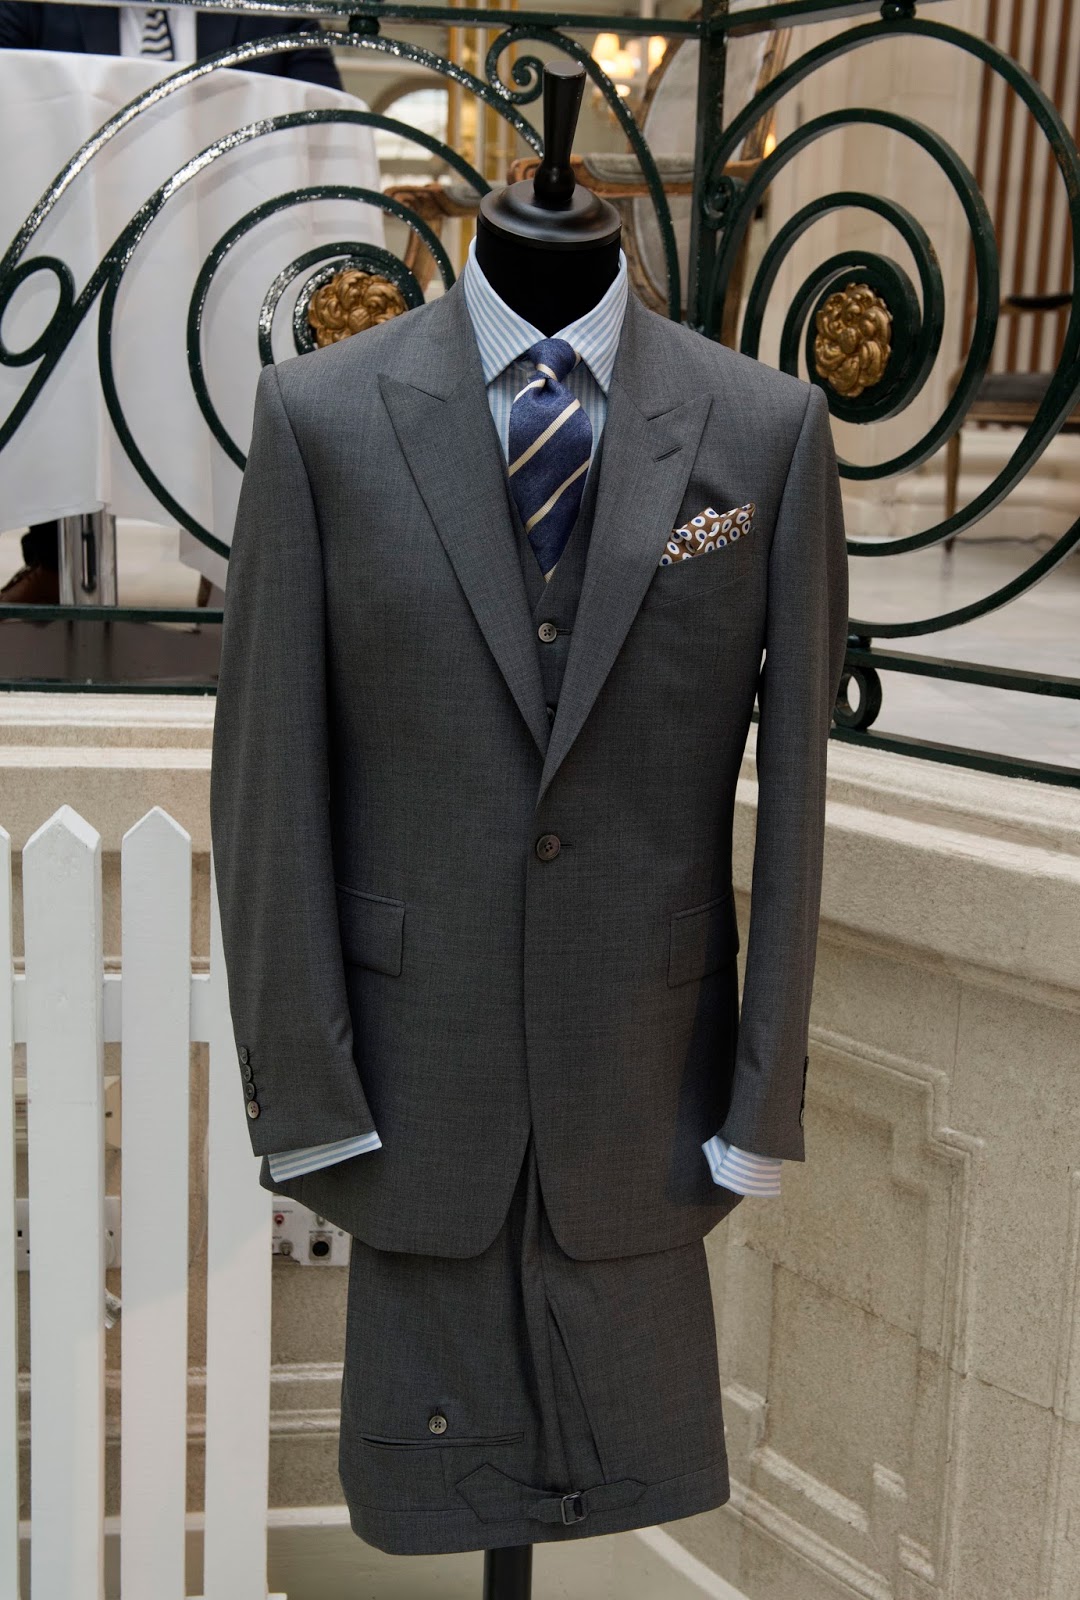 men's styling: Chester Barrie Spring/Summer 2017 at London Collections:Men